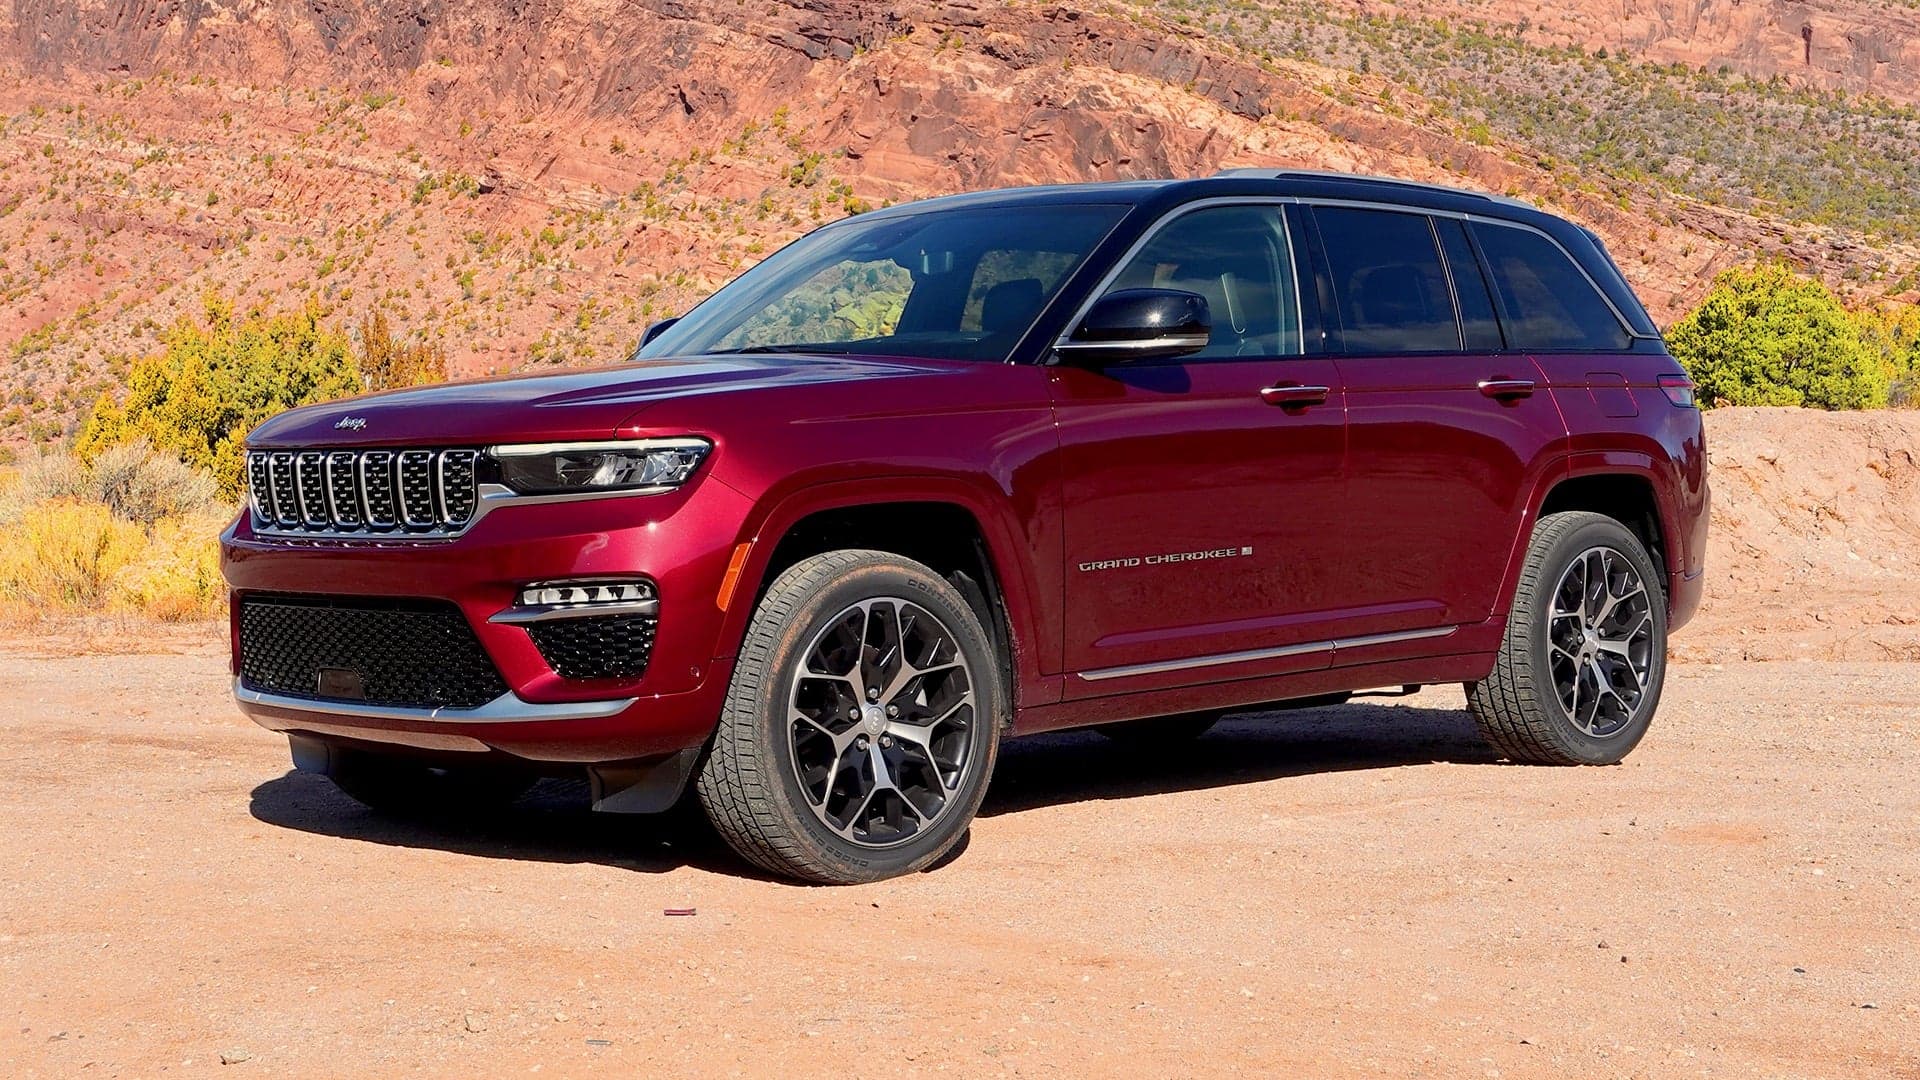 2022 Jeep Grand Cherokee First Drive Review: Still the Defining Rugged-Luxury SUV